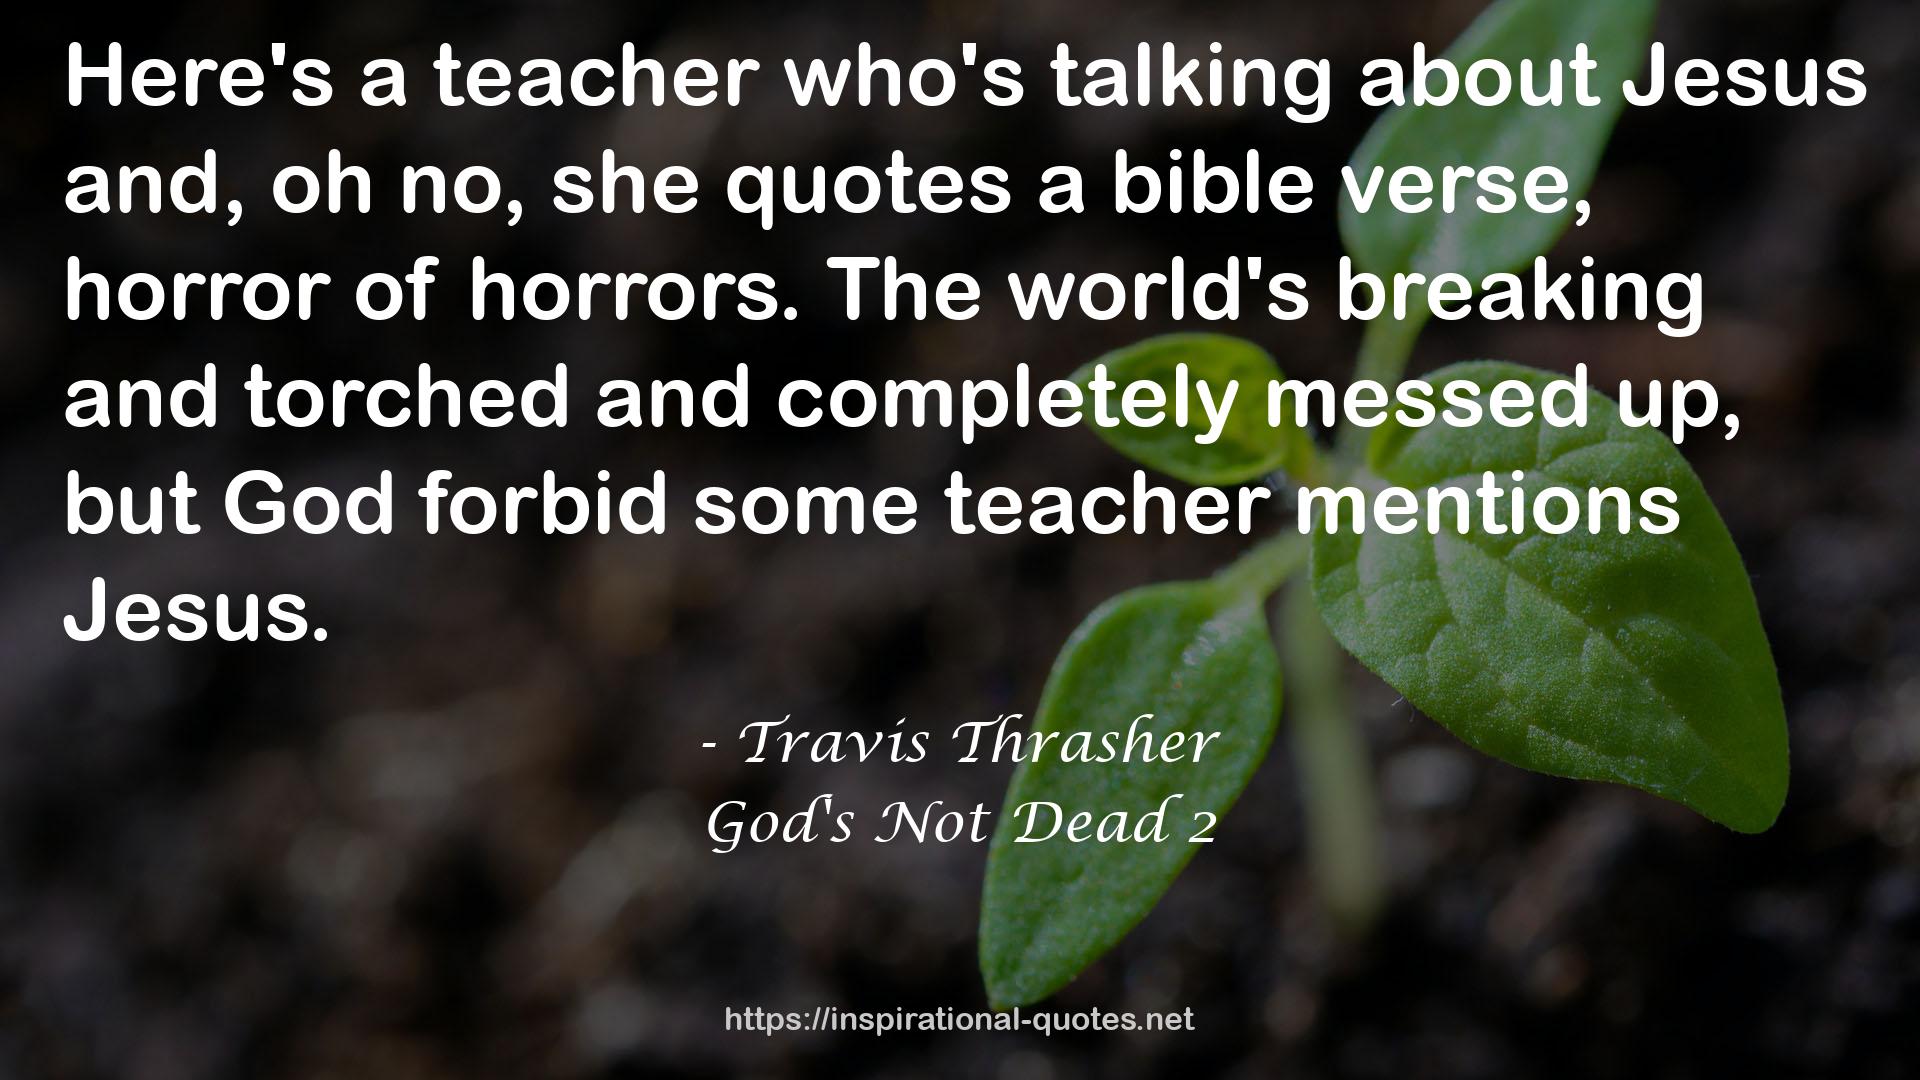 God's Not Dead 2 QUOTES